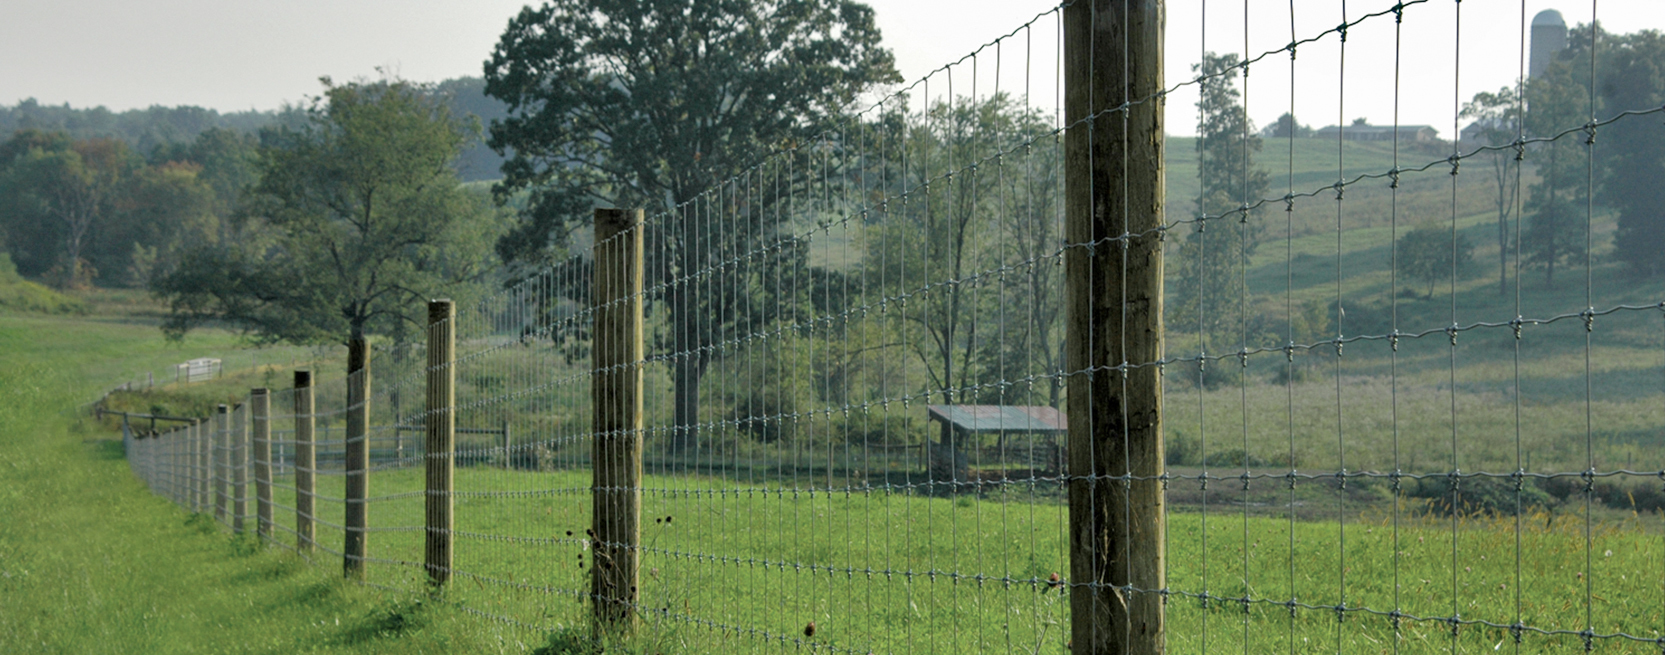 Triple X Fencing Kits - Agricultural Fencing - Farm and Fencing